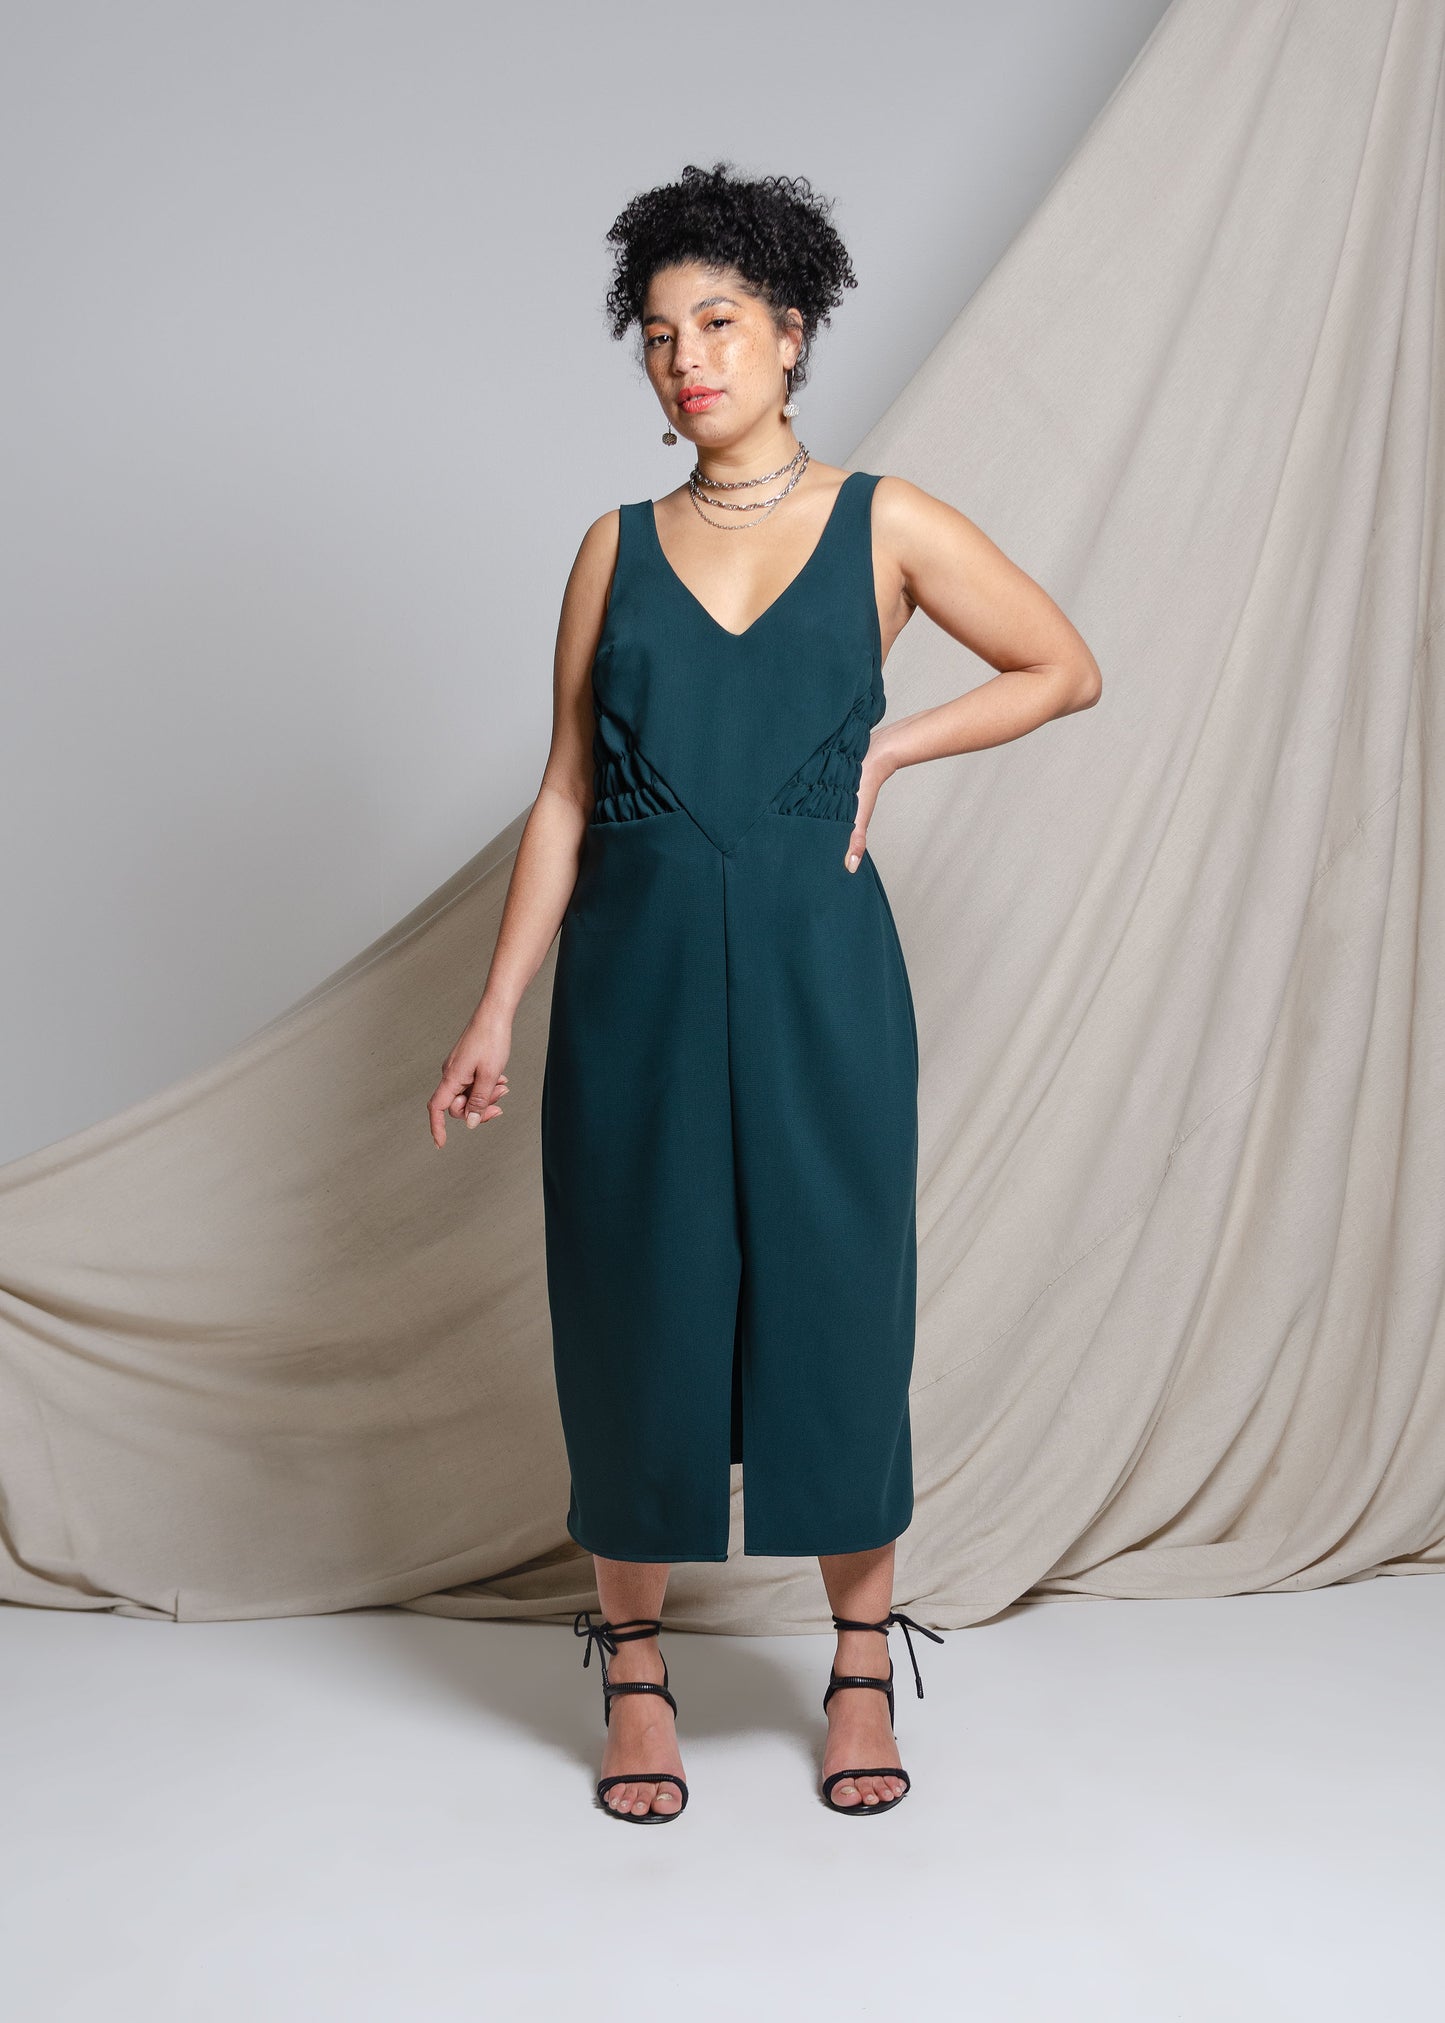 Form skimming Midi length A-line dress with gathered side panels and very low back. Forest green double weave fabric. 